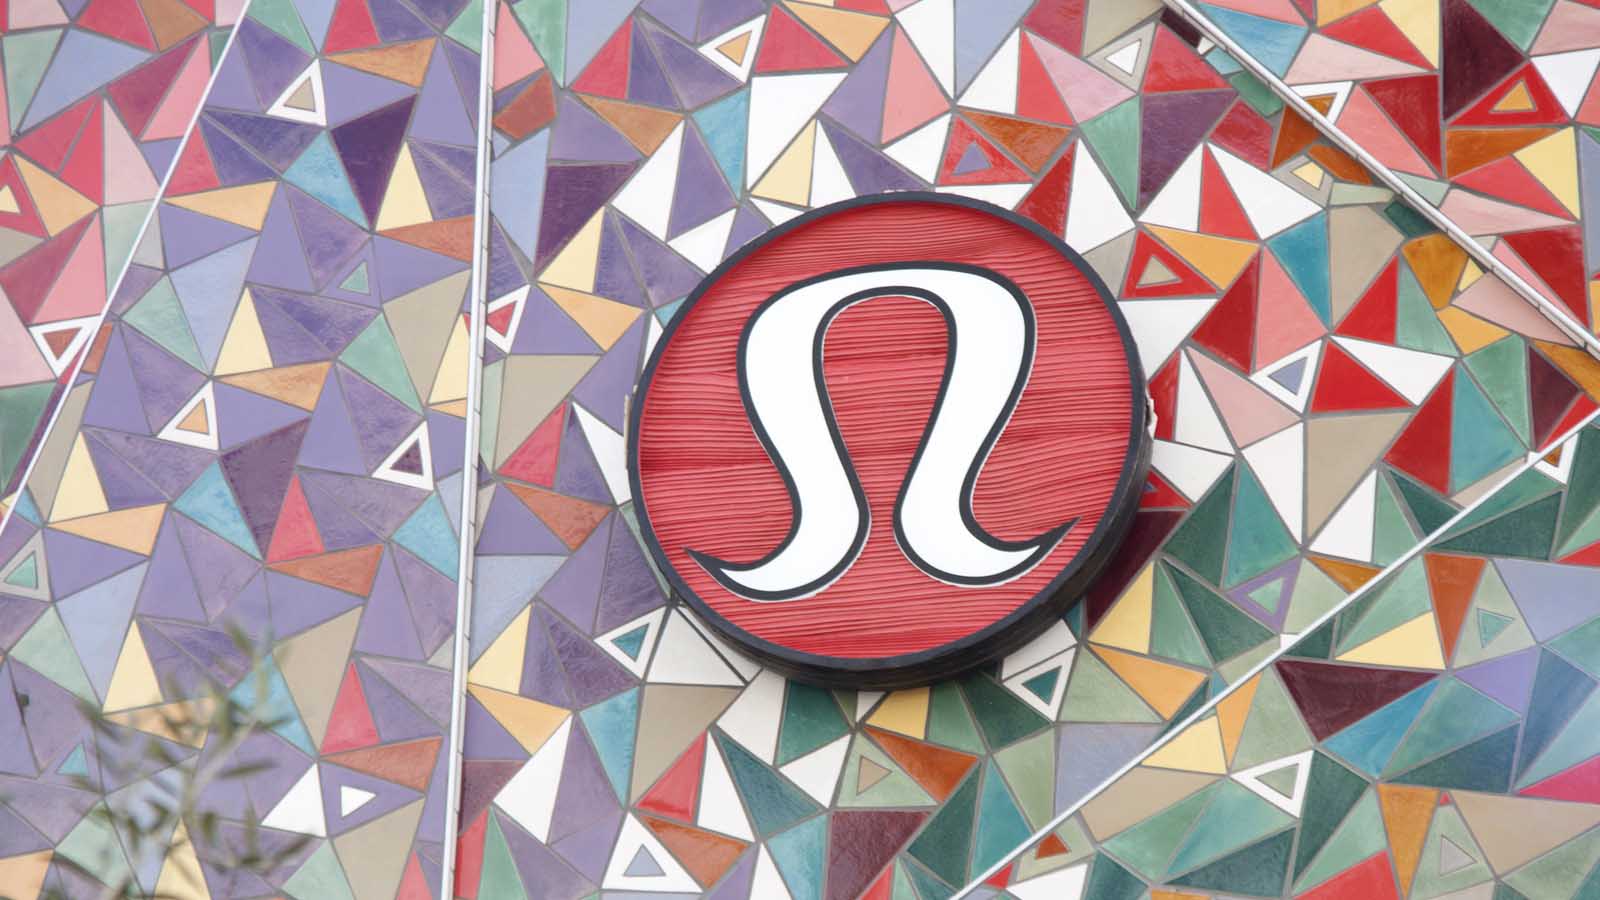 LULU Stock Alert: What to Know as Lululemon Joins S&P 500